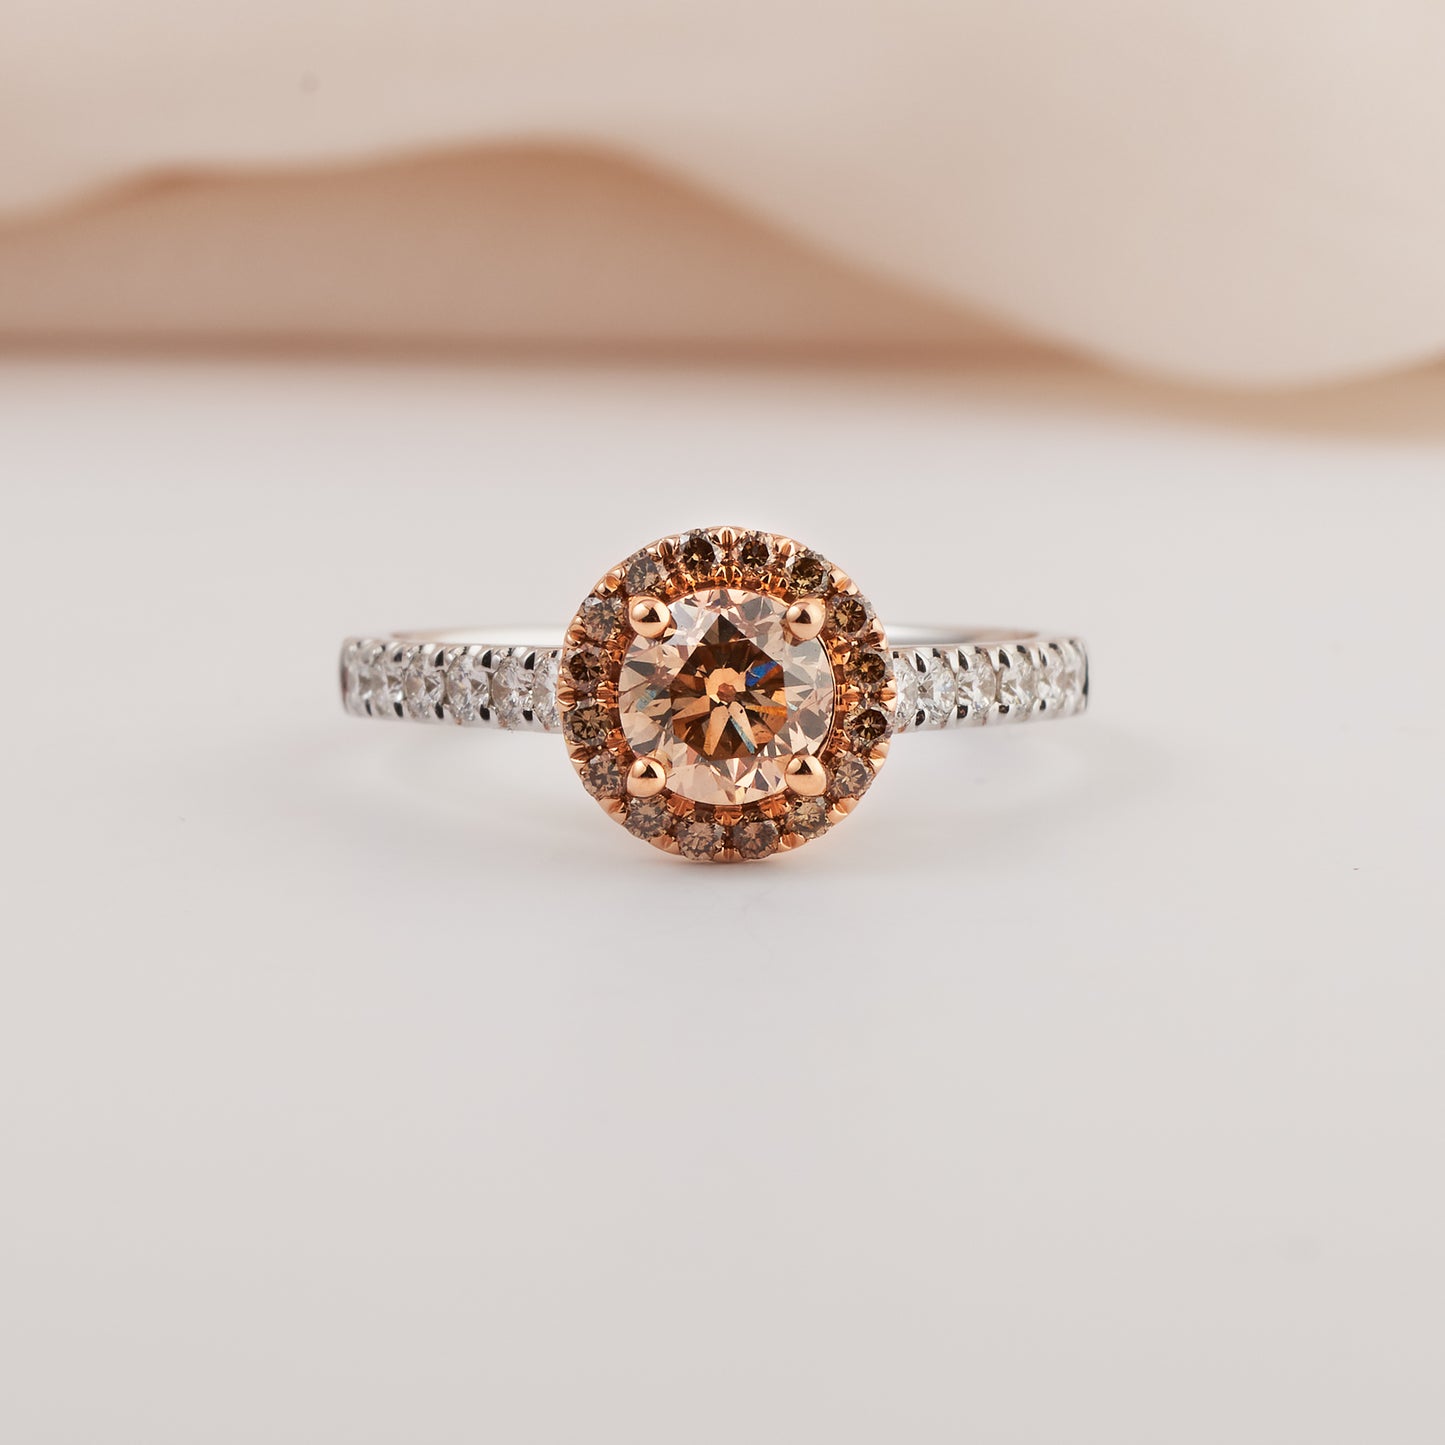 18K White and Rose Gold Champagne Diamond Halo Engagement Ring 1.48tdw